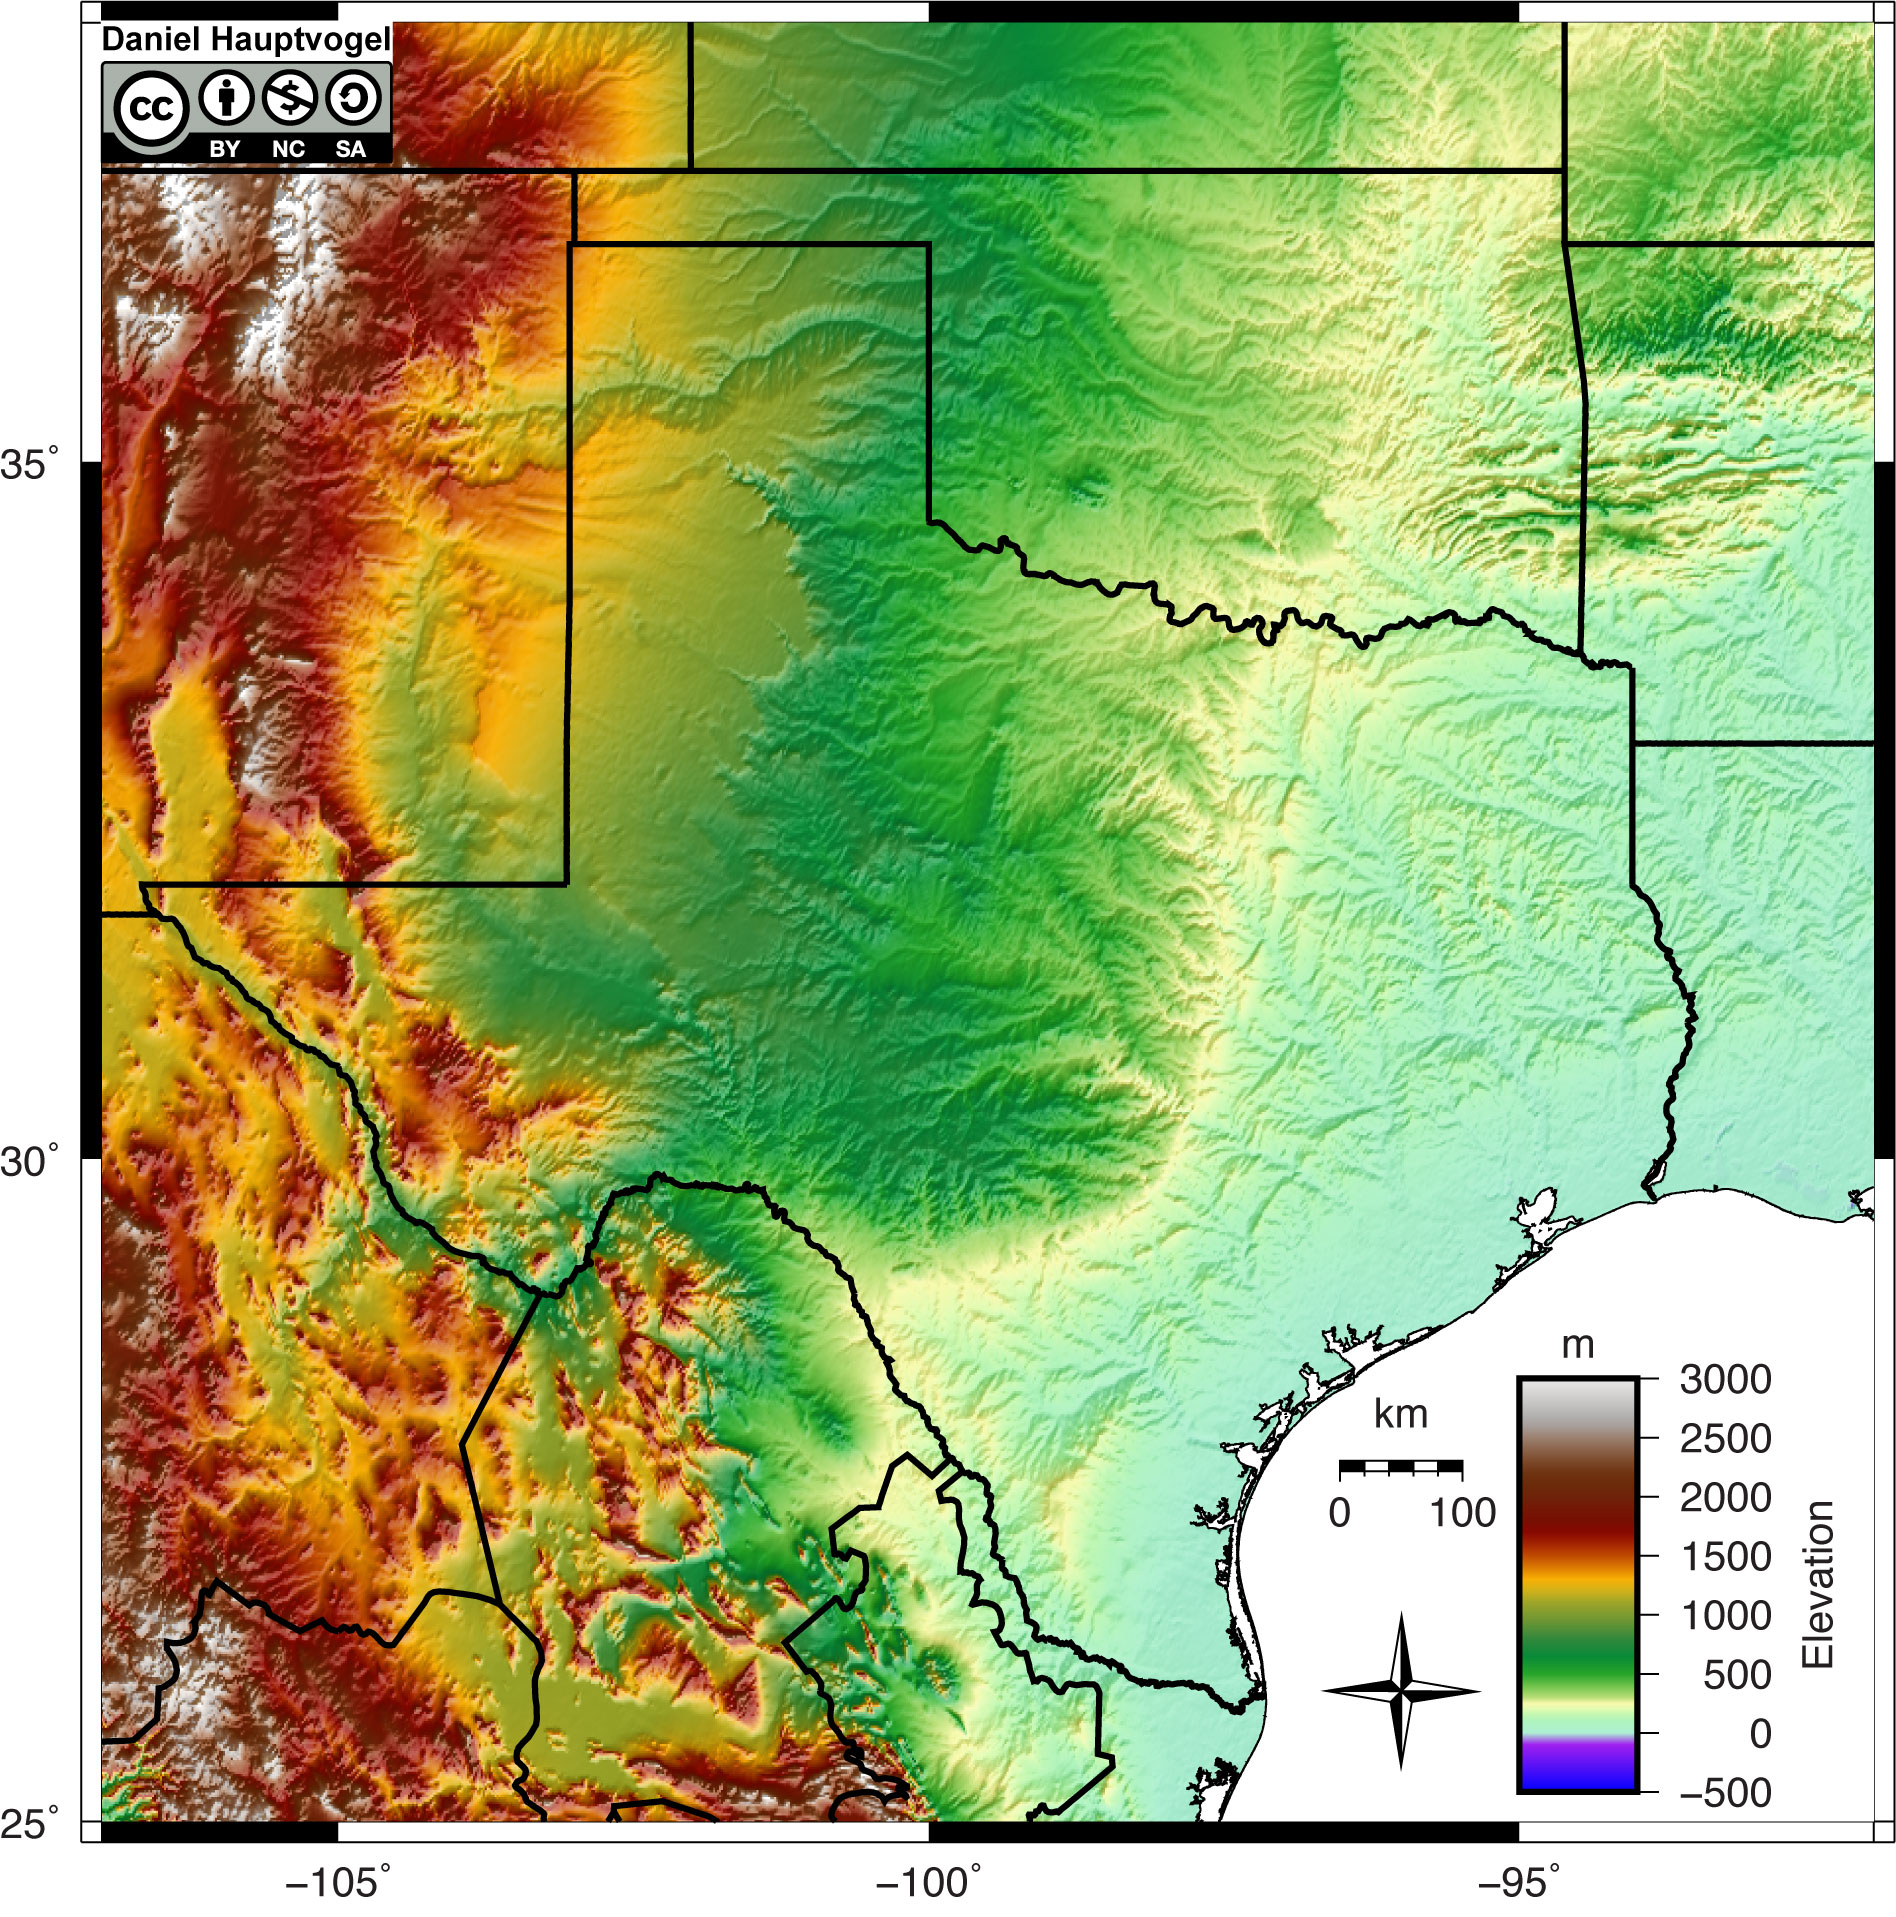 Shaded relief map of Texas.